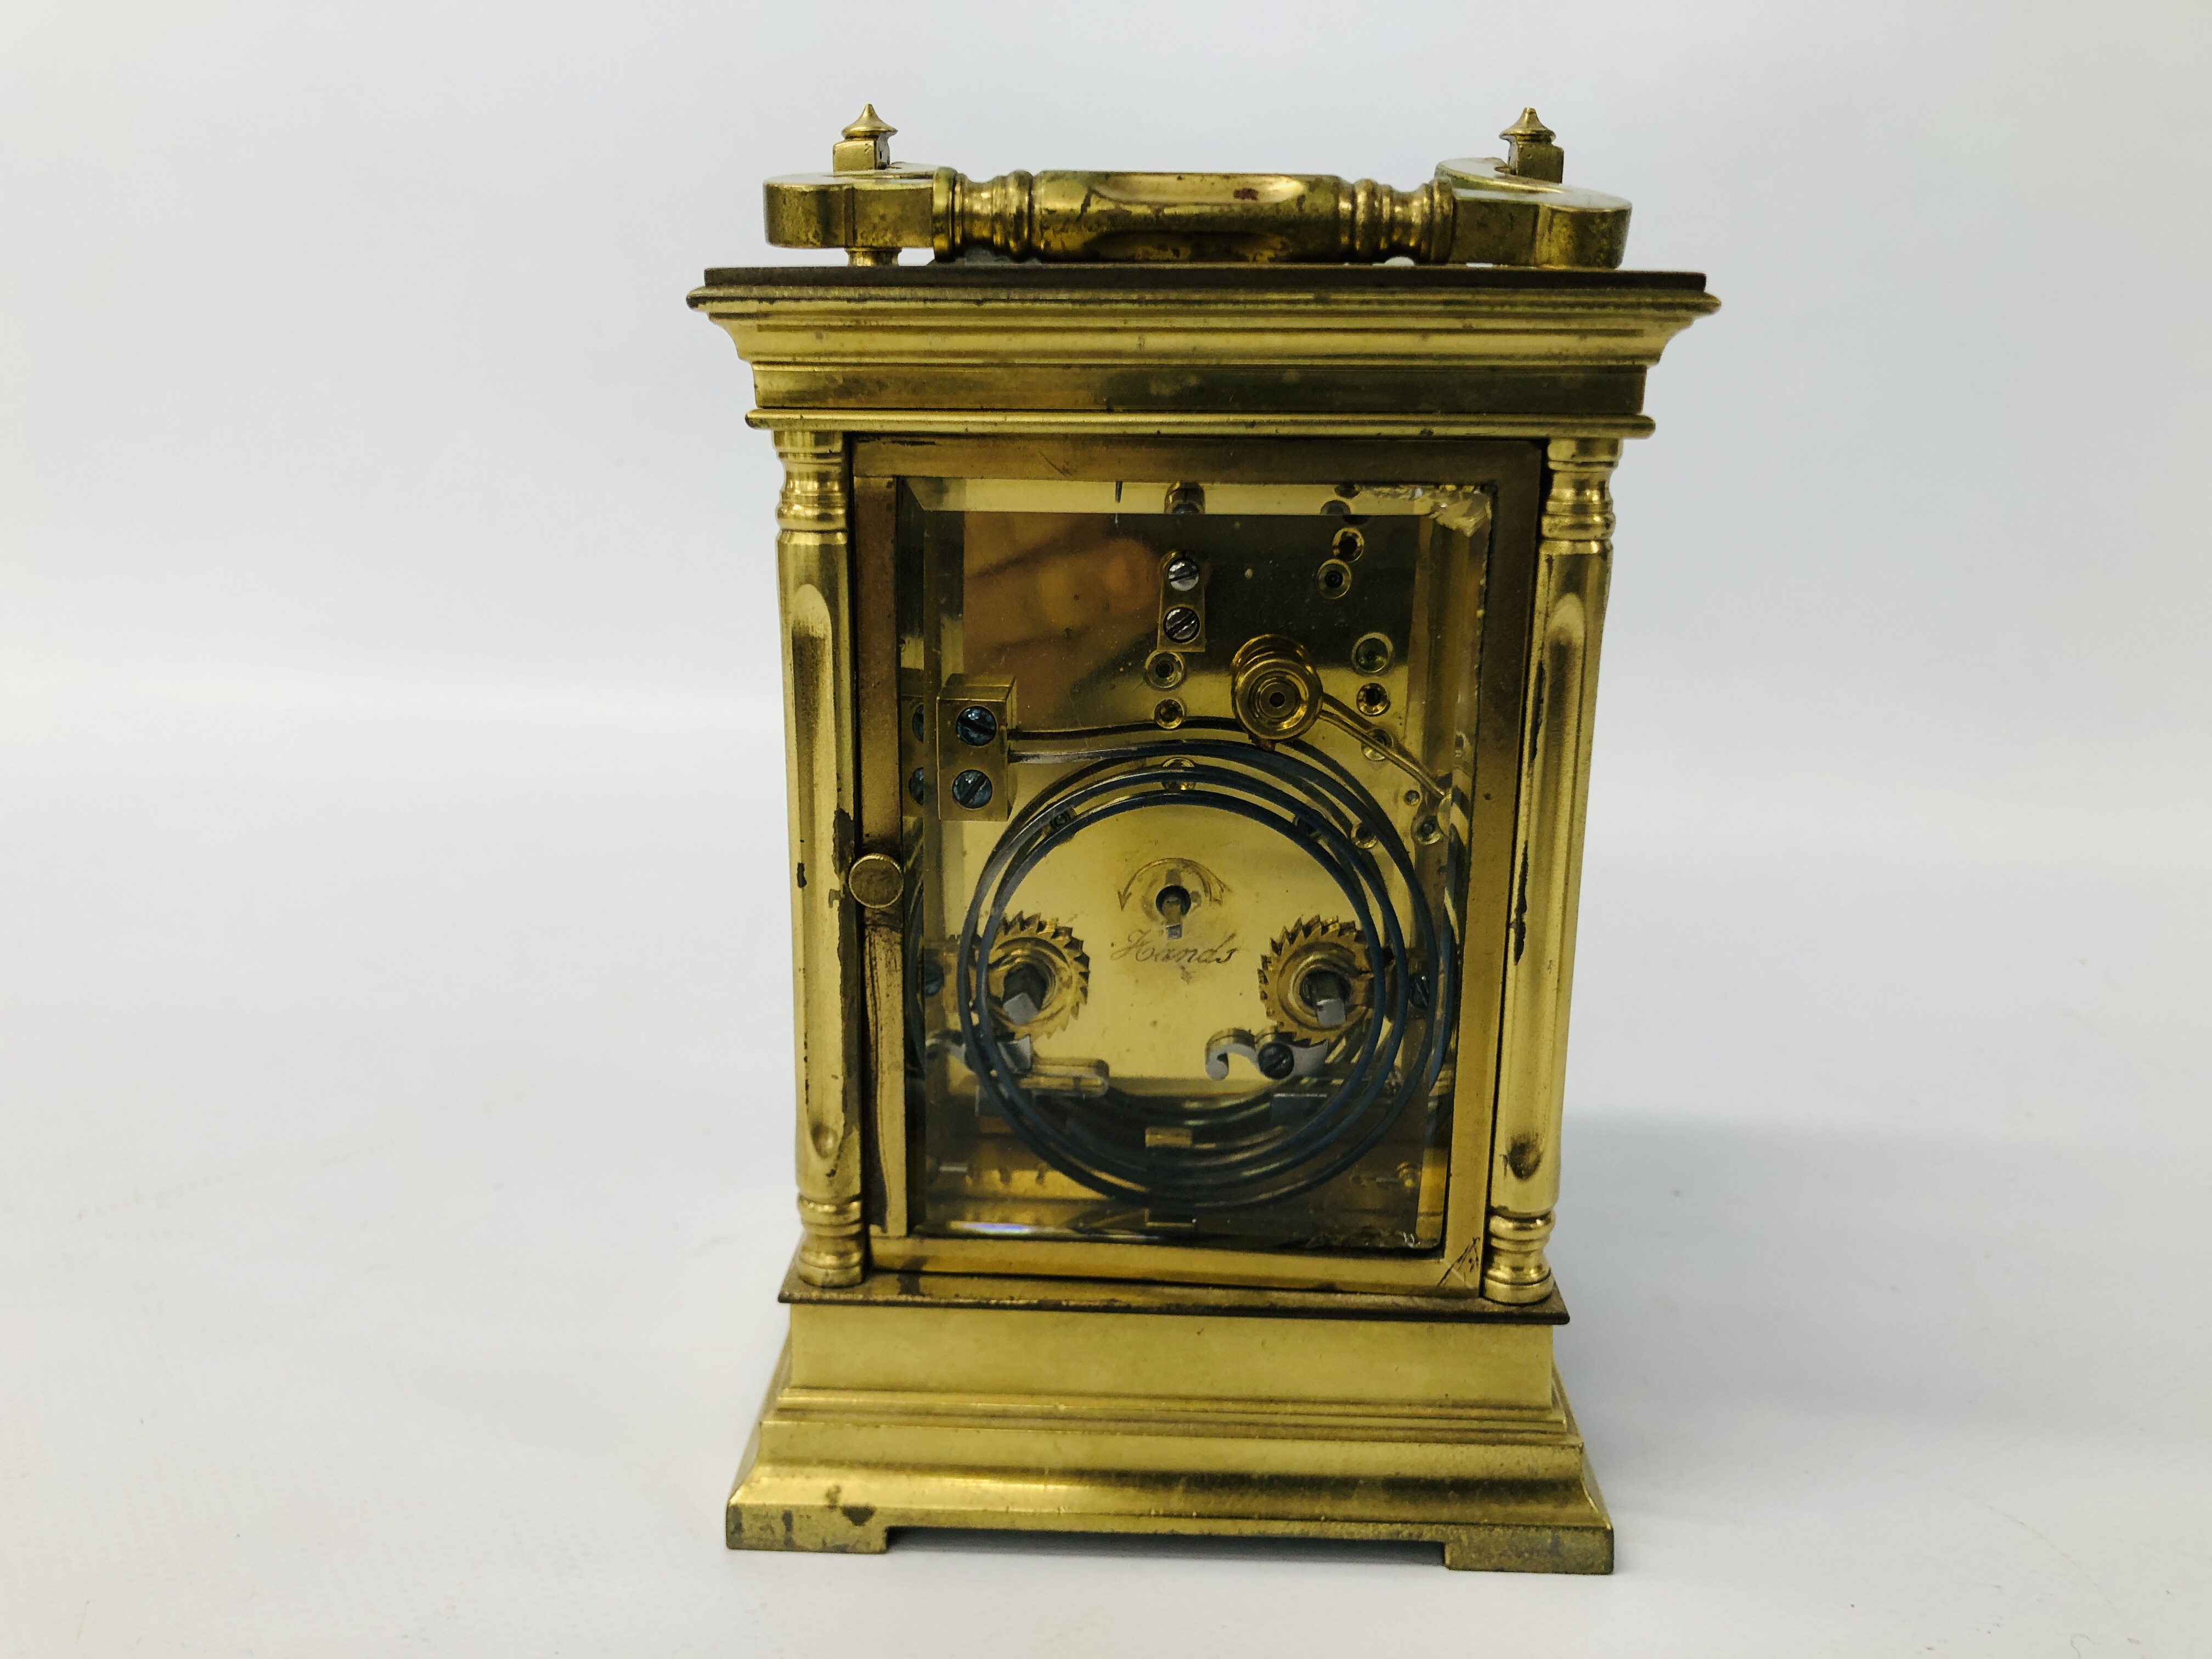 ANTIQUE BRASS CARRIDGE CLOCK WITH ENAMELLED FACE (REQUIRES ATTENTION TO THE REAR GLASS) H 14CM. - Image 5 of 9